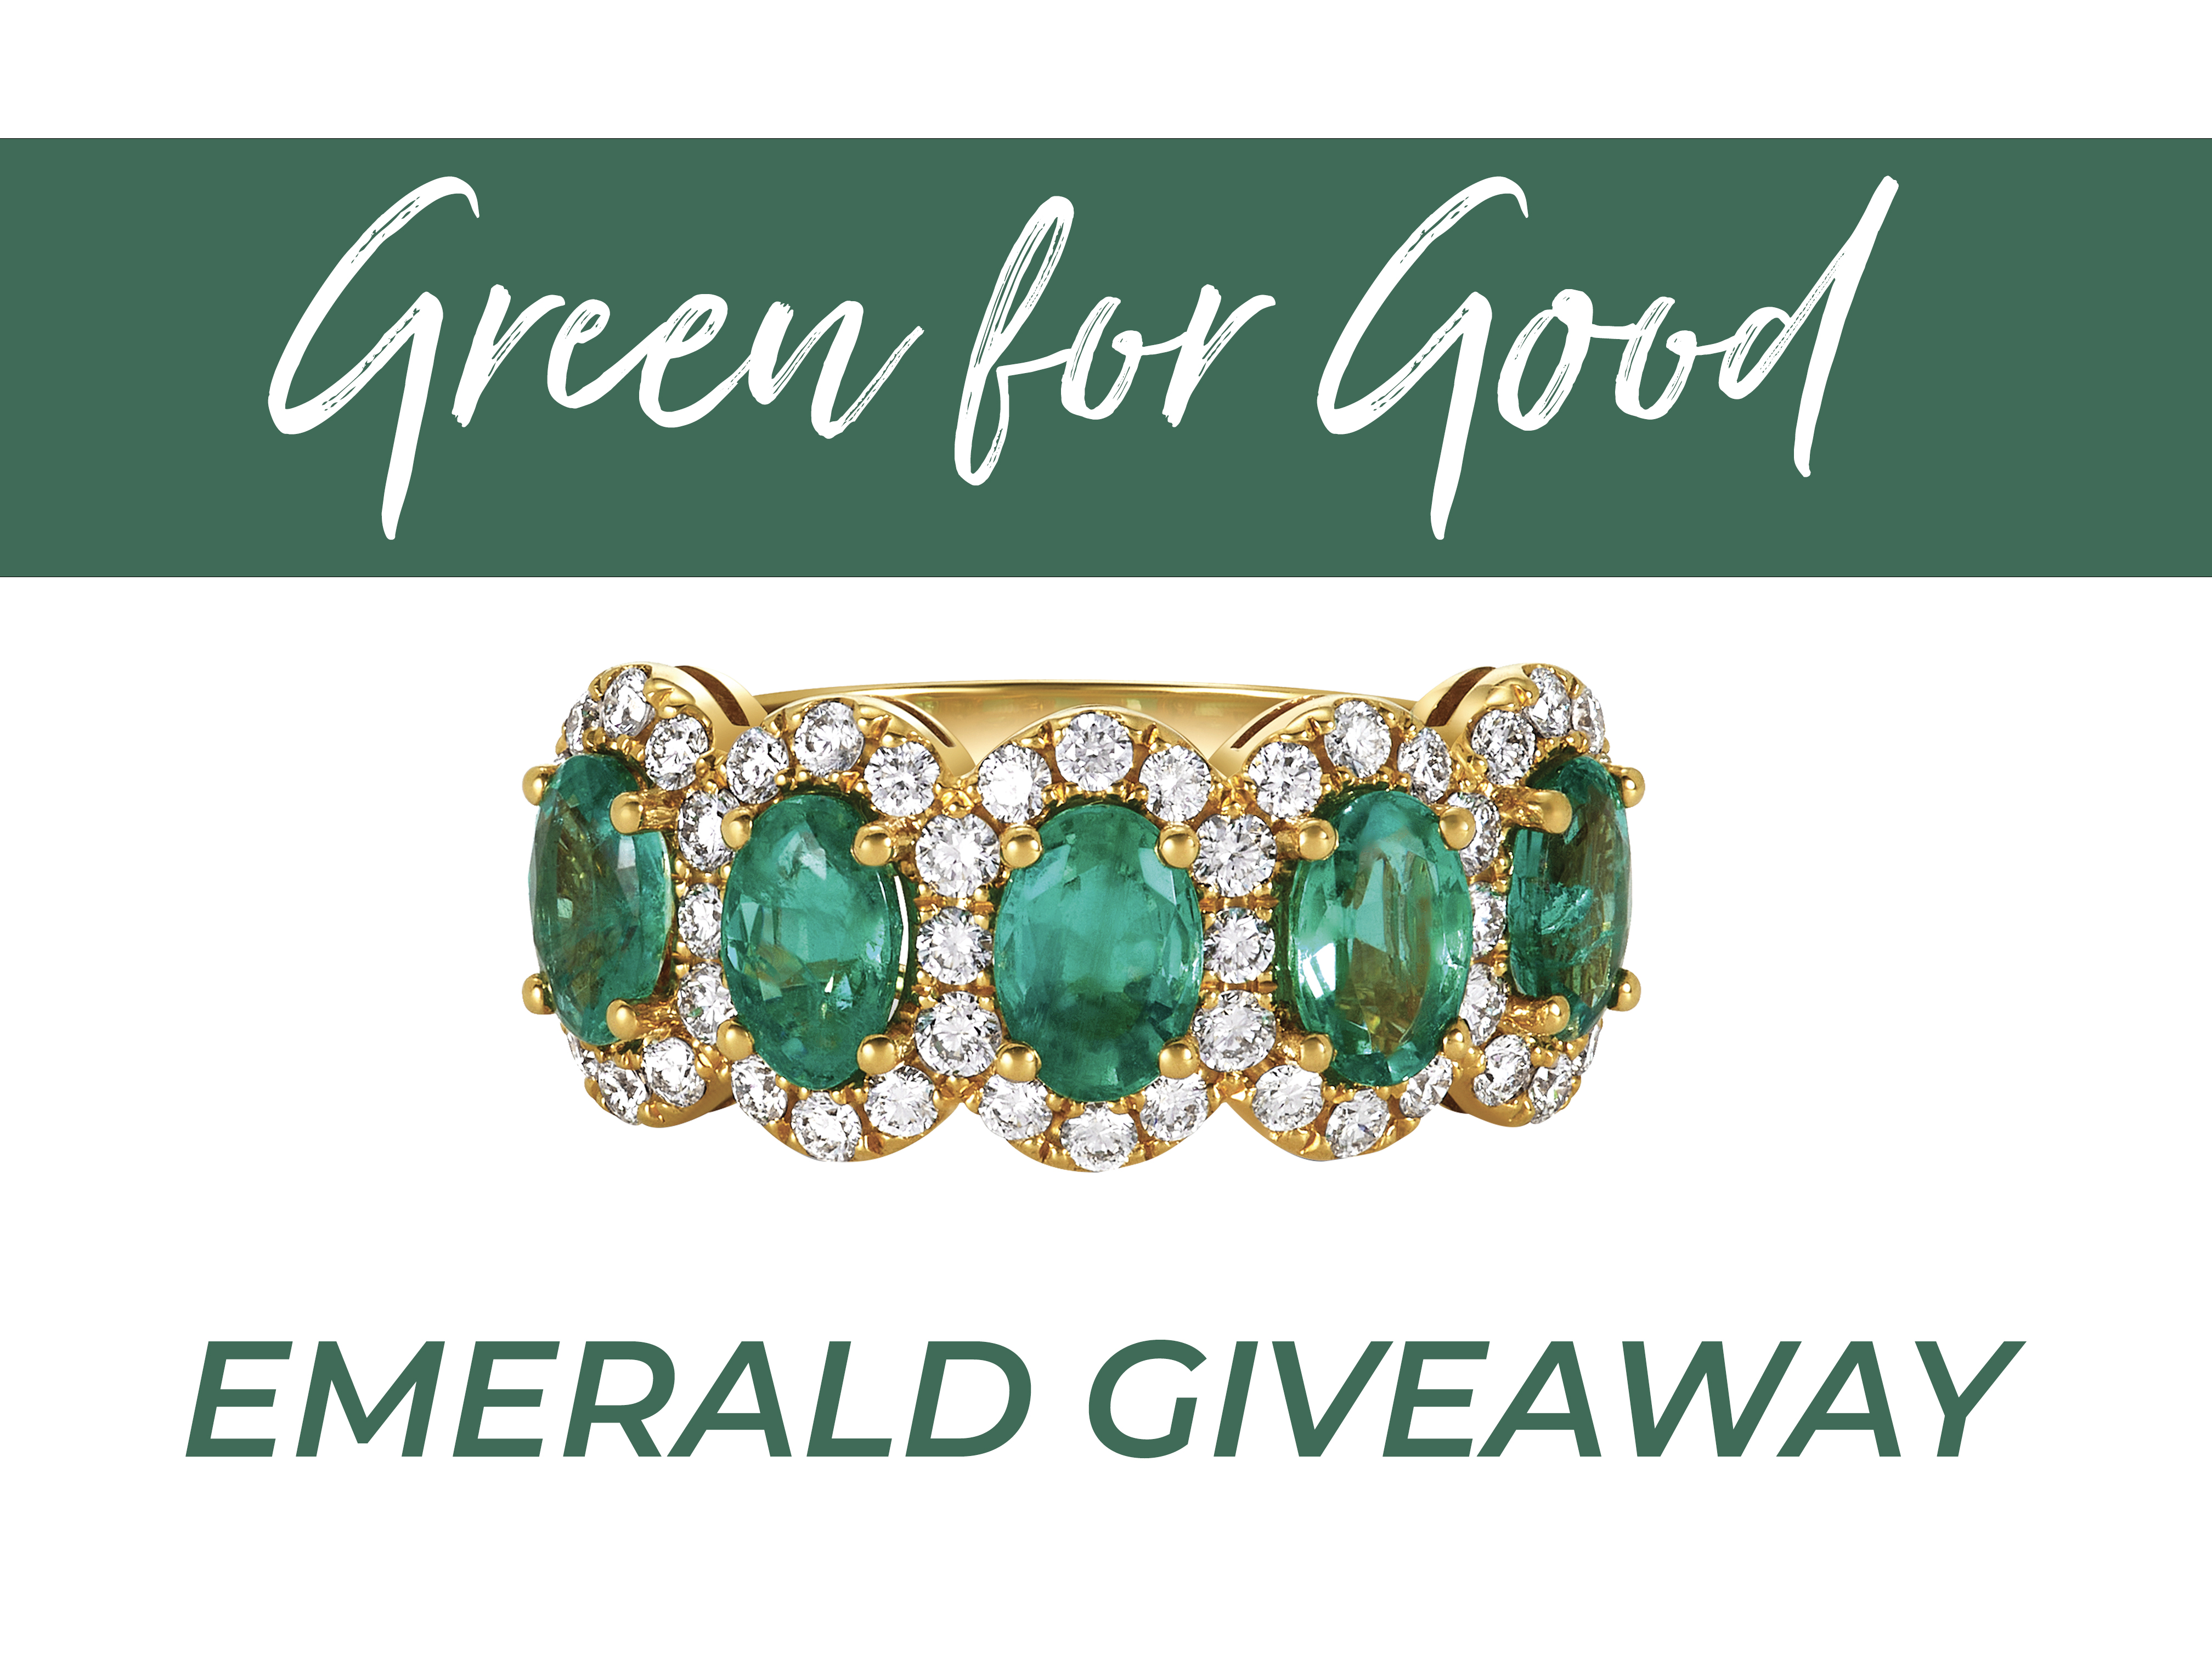 Green for Good - Emerald Enchantment Giveaway! Accompanying Image